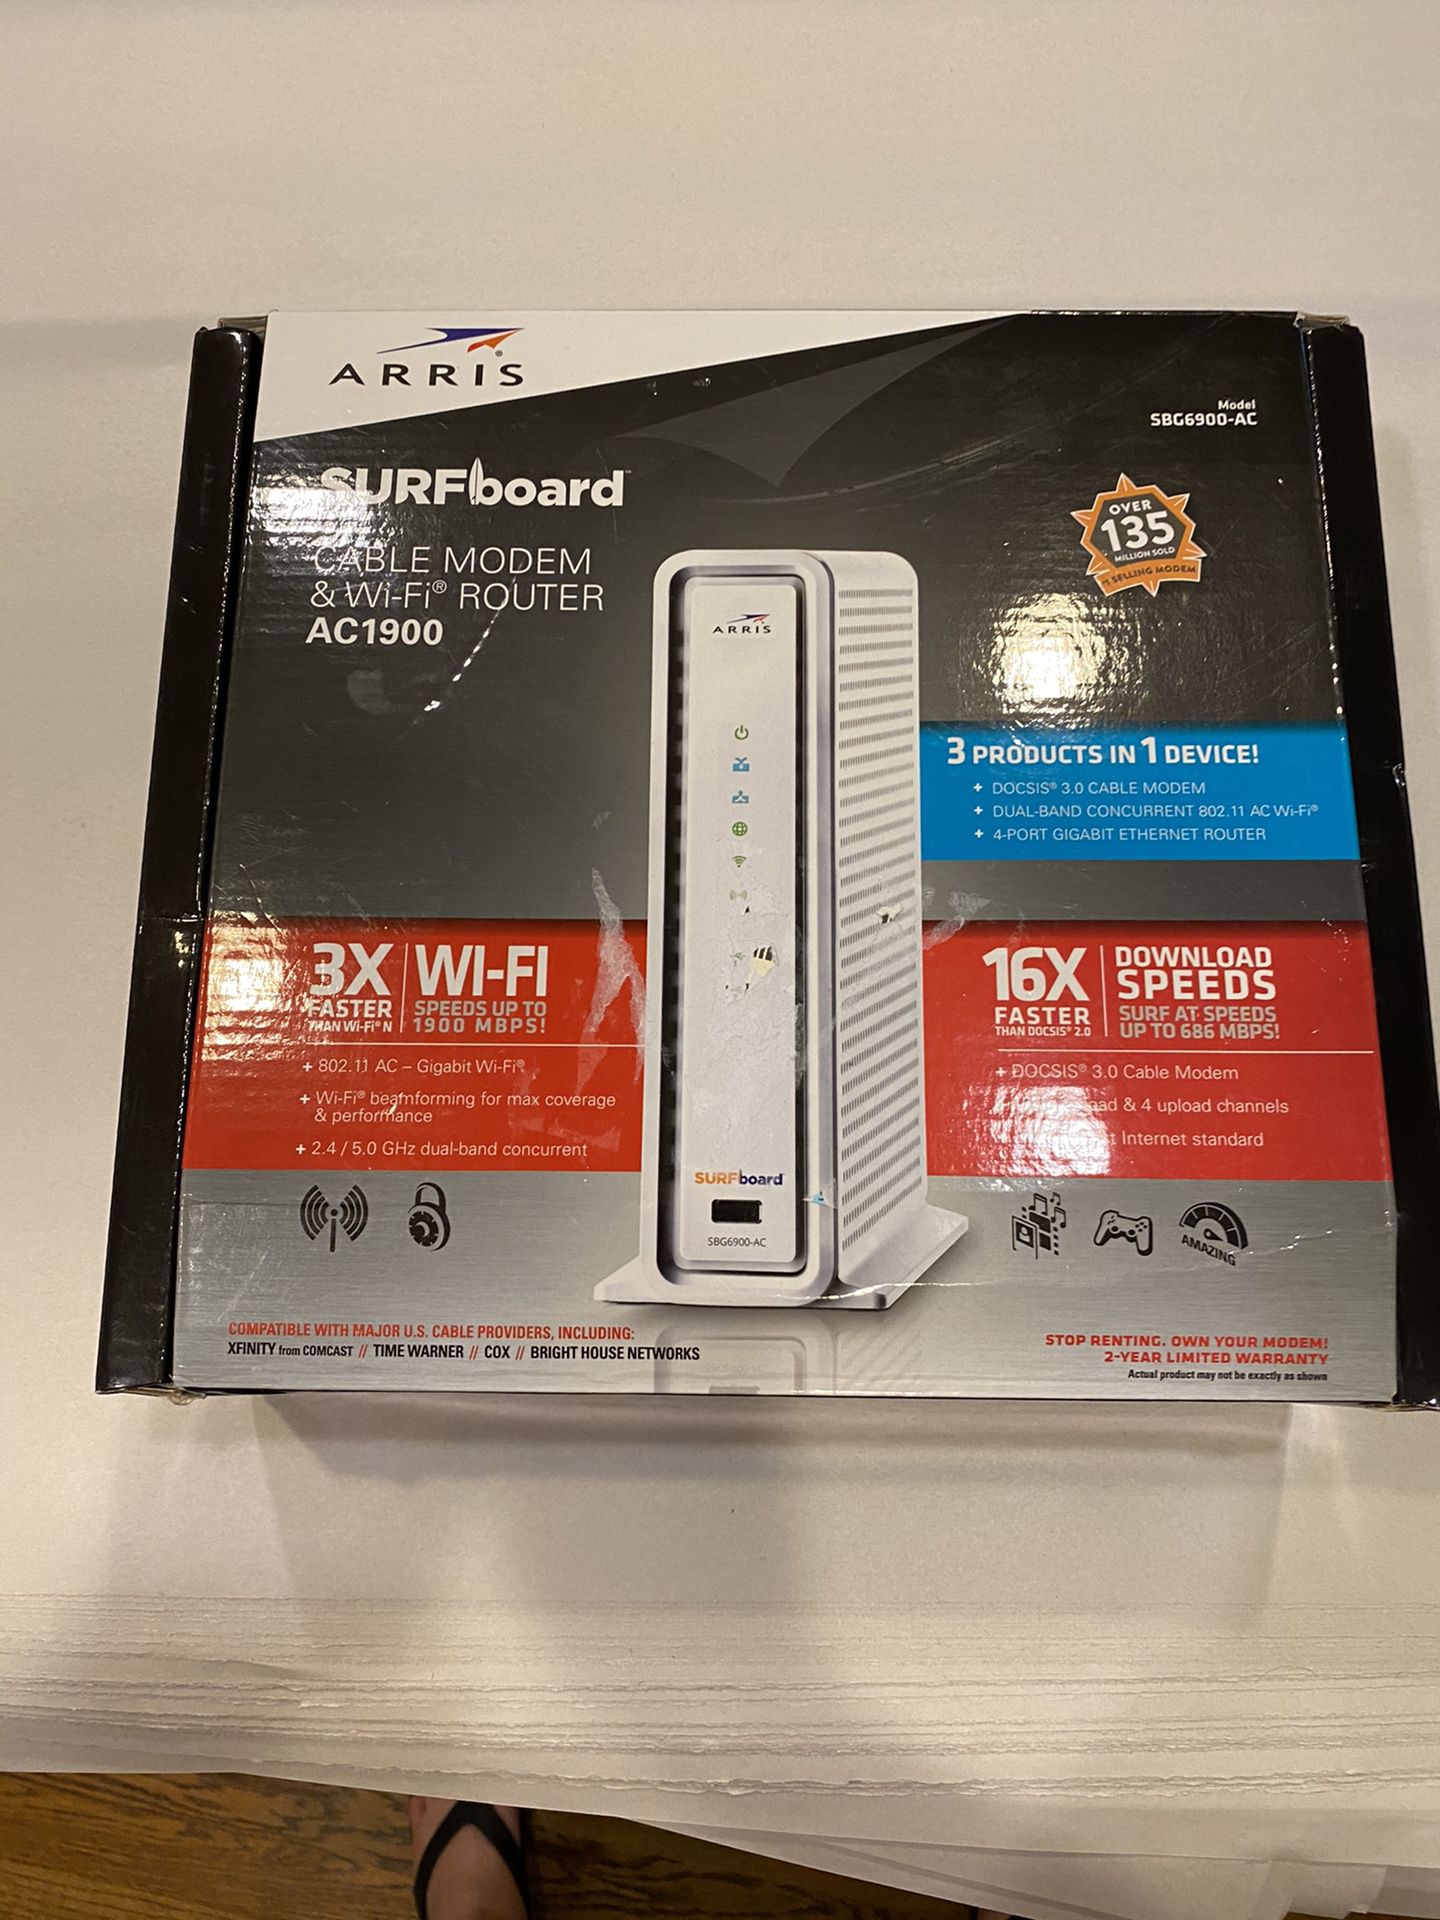 Arris surfboard cable modem and wi-fi router combo